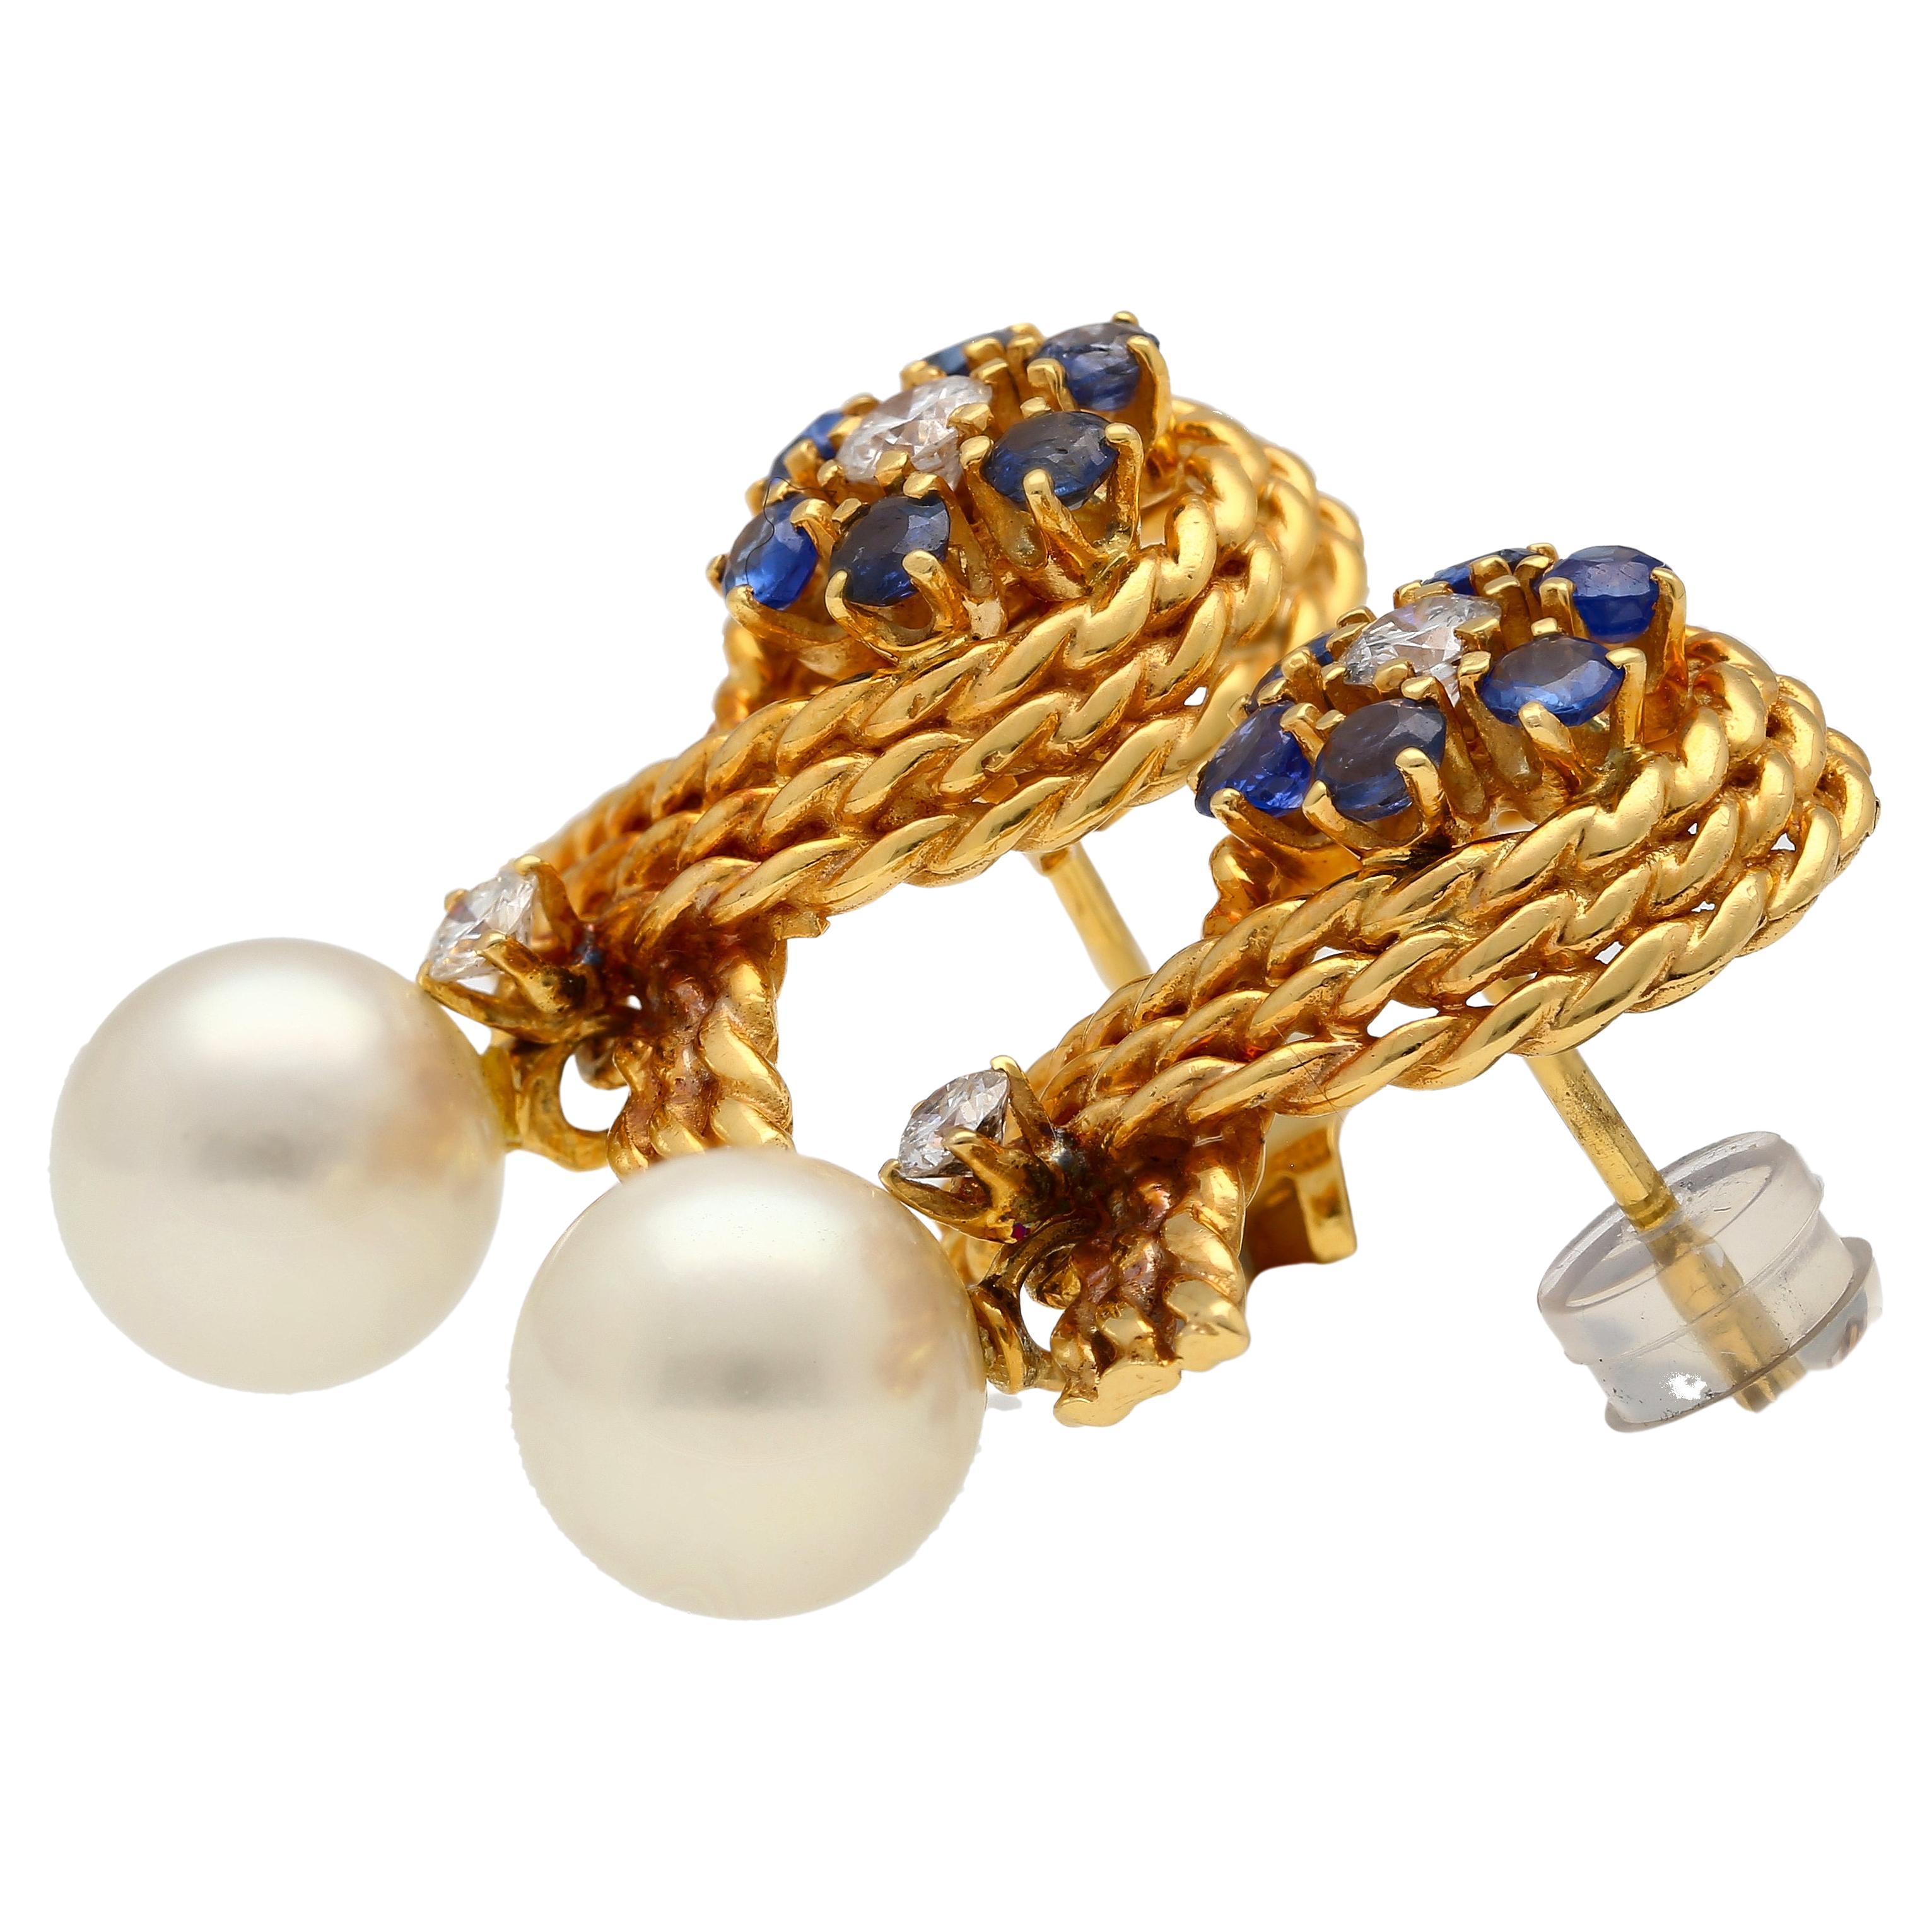 14K solid gold textured ribbon motif stud earrings. Set with a cultured white pearl, round-cut diamonds, and round-cut blue sapphires. Complete with a secure push back closure.

Item Details:
- Type: Earring
- Metal: 14K Solid Gold
- Weight: 7.04